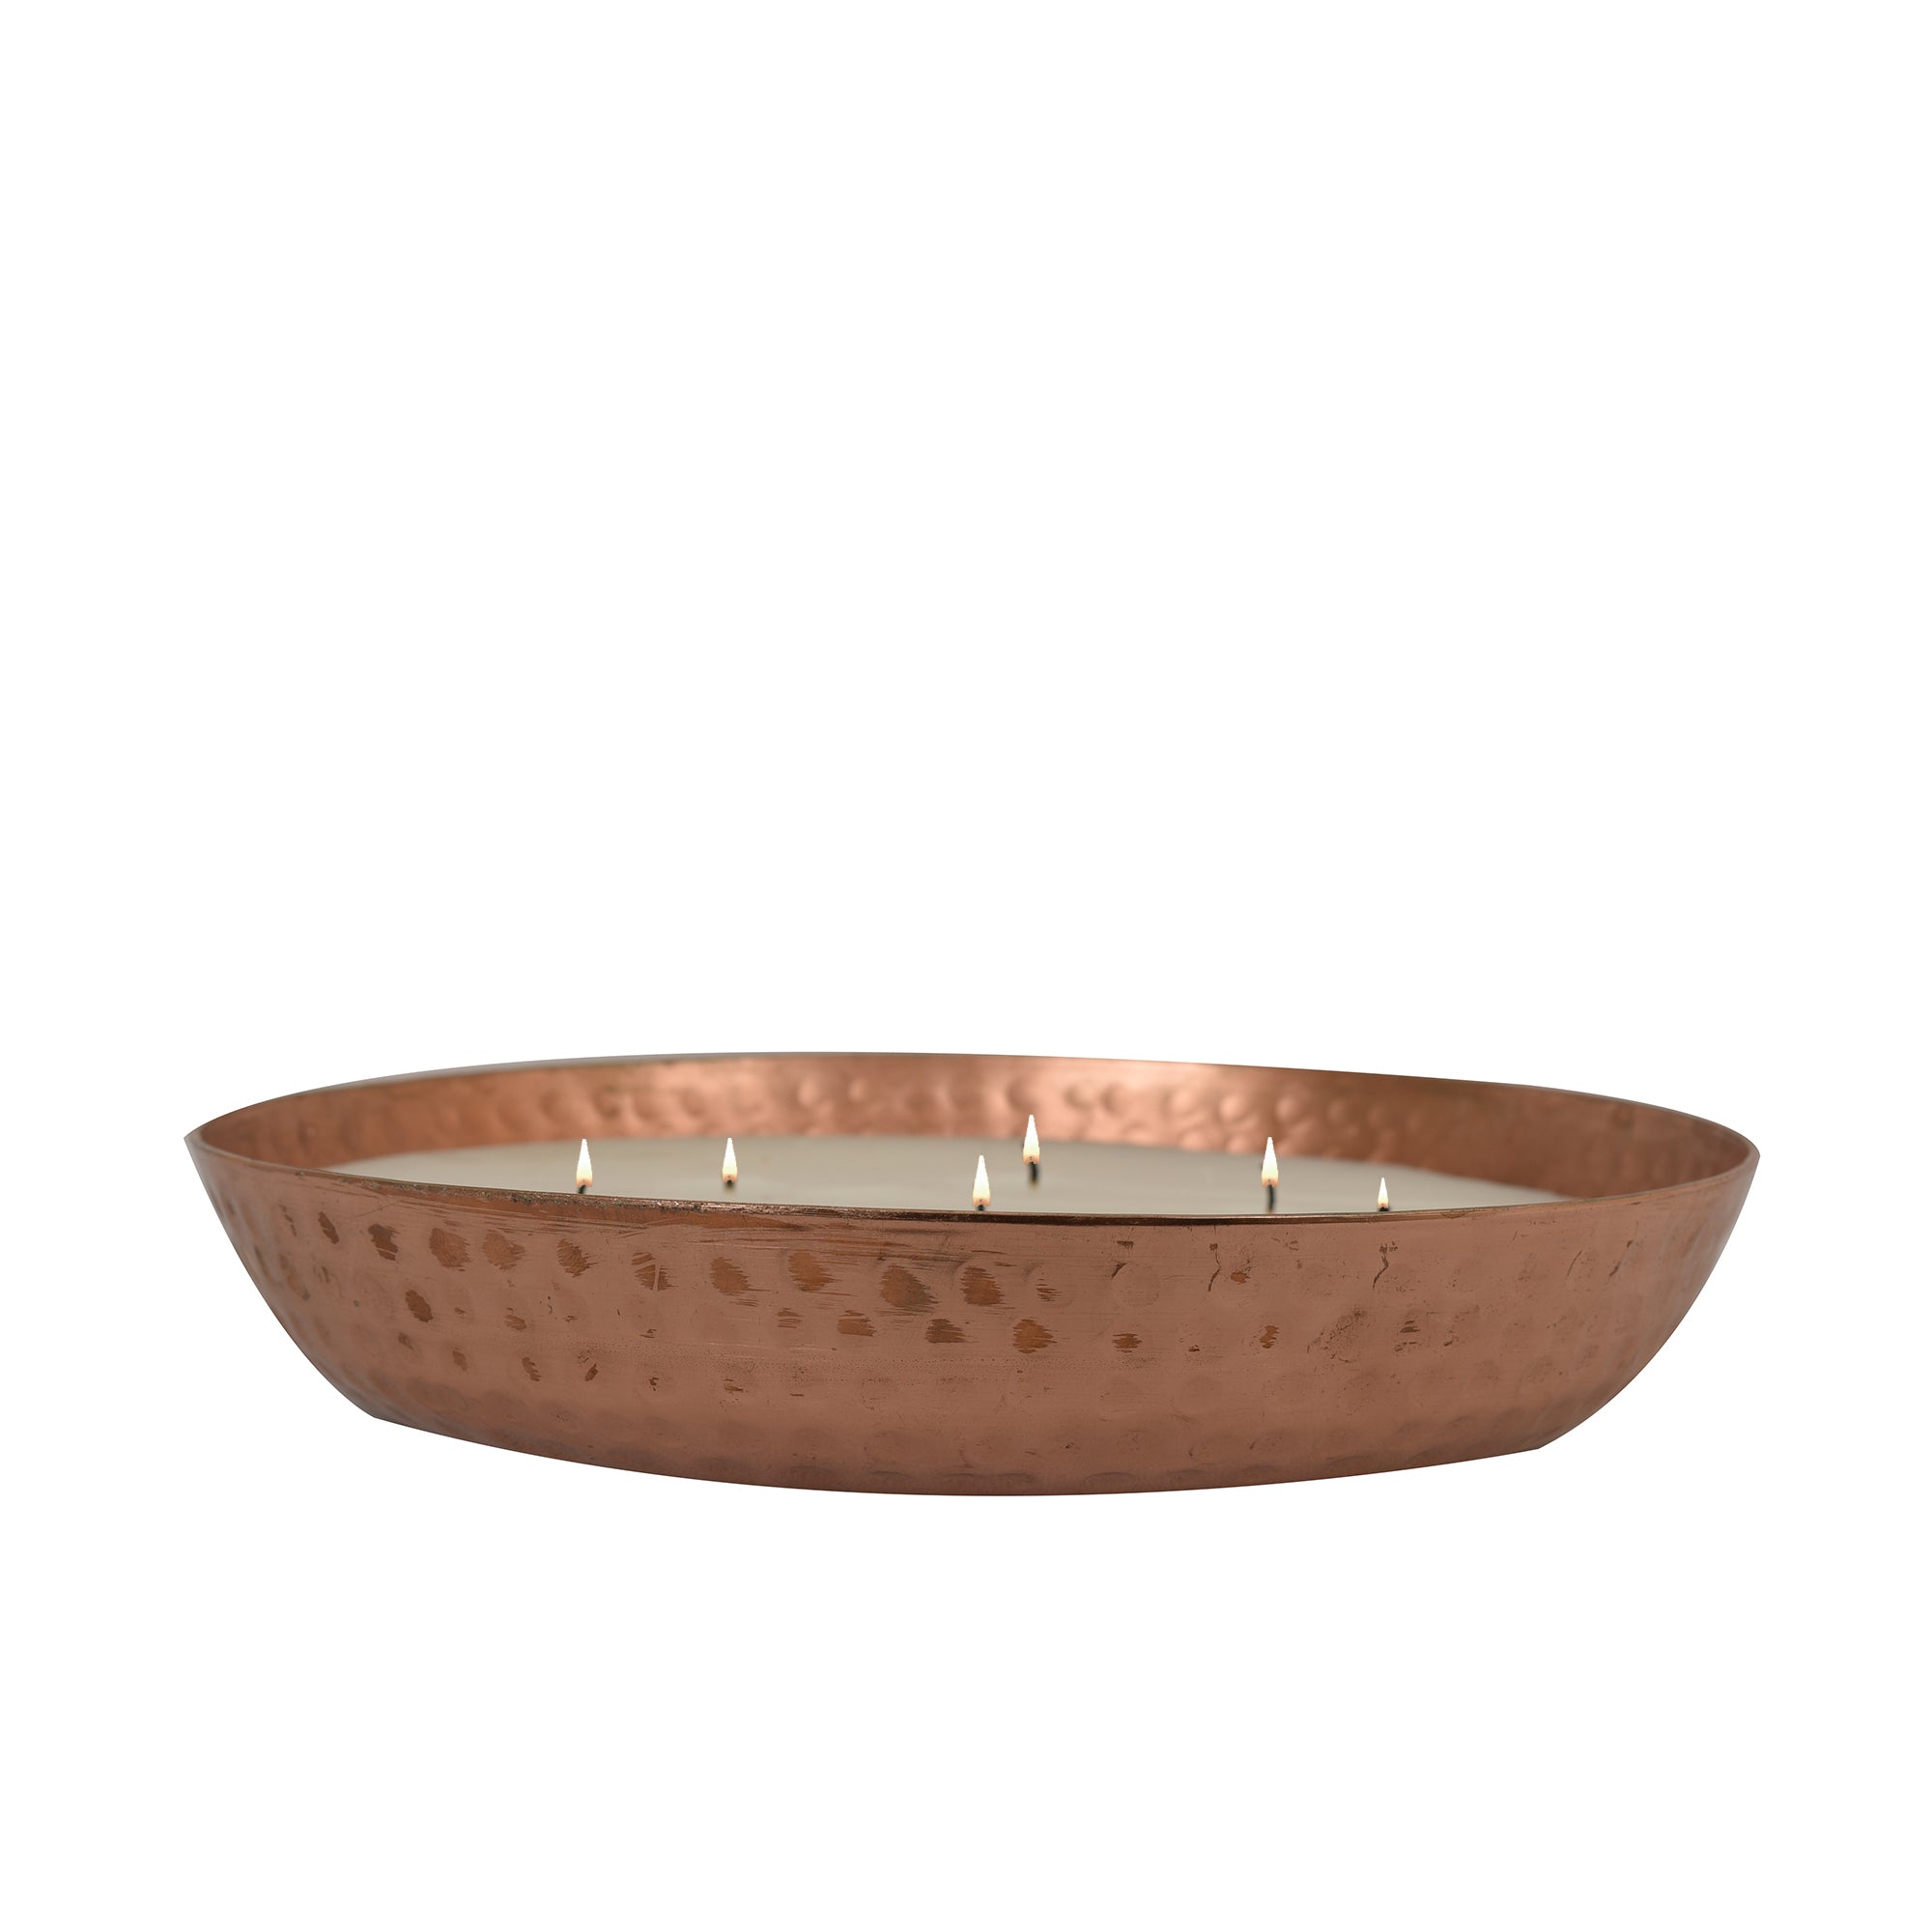 Roshni Scented Flovored Wax Filled Metal Bowl Urli 10 inches